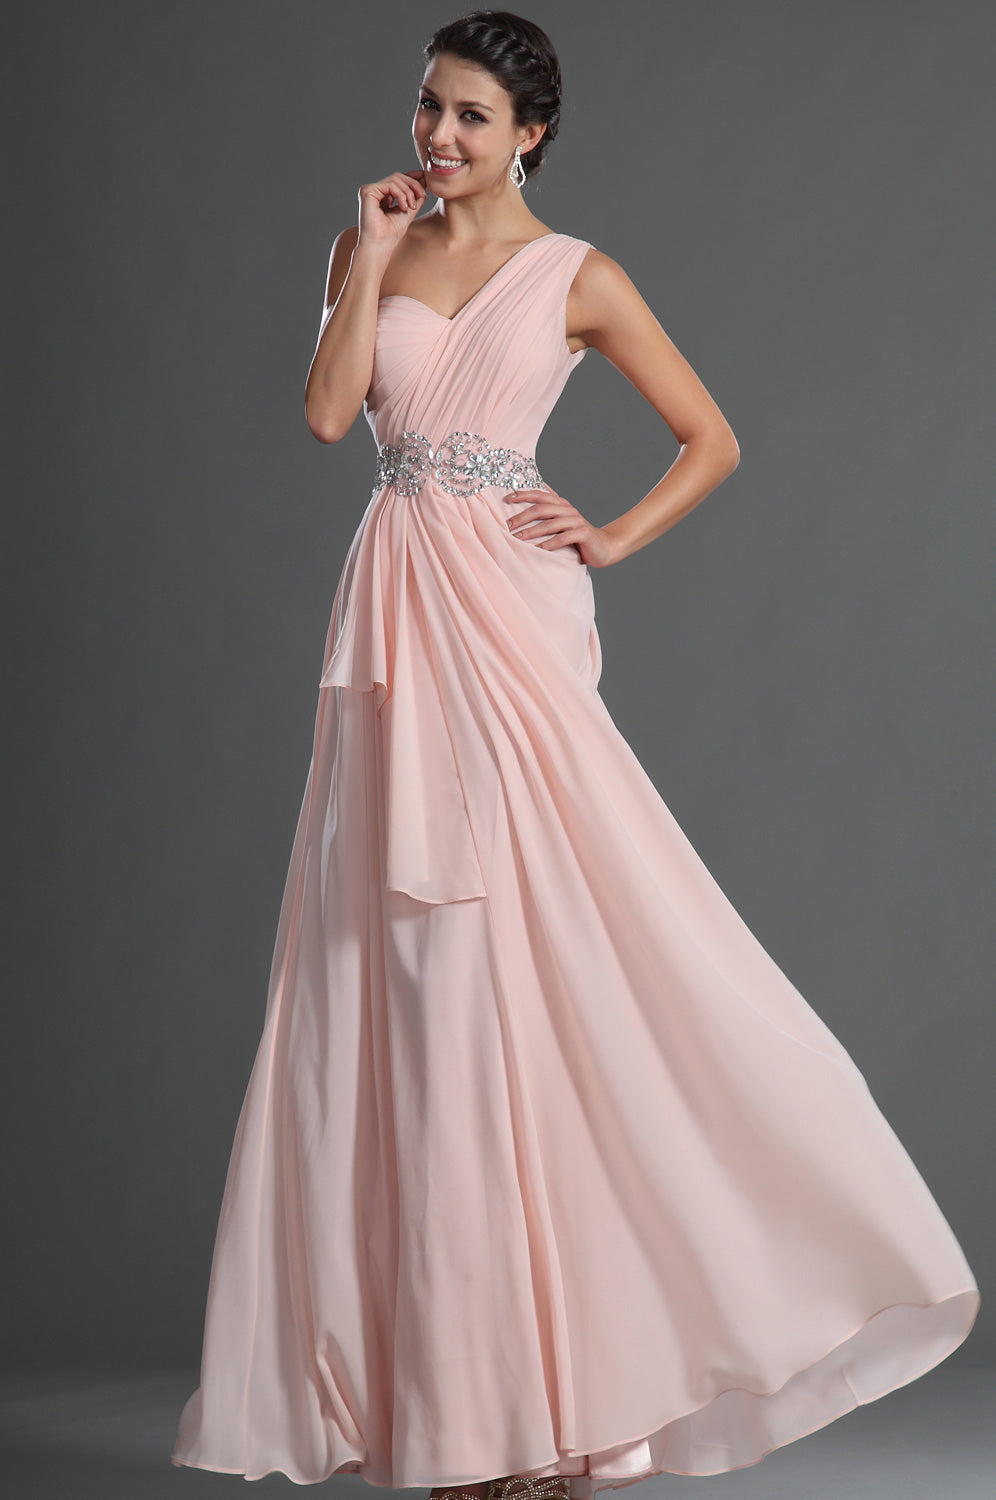 A-Line Pink Chiffon One Shoulder With Beading Bridesmaid Dress(UKBD03-517)